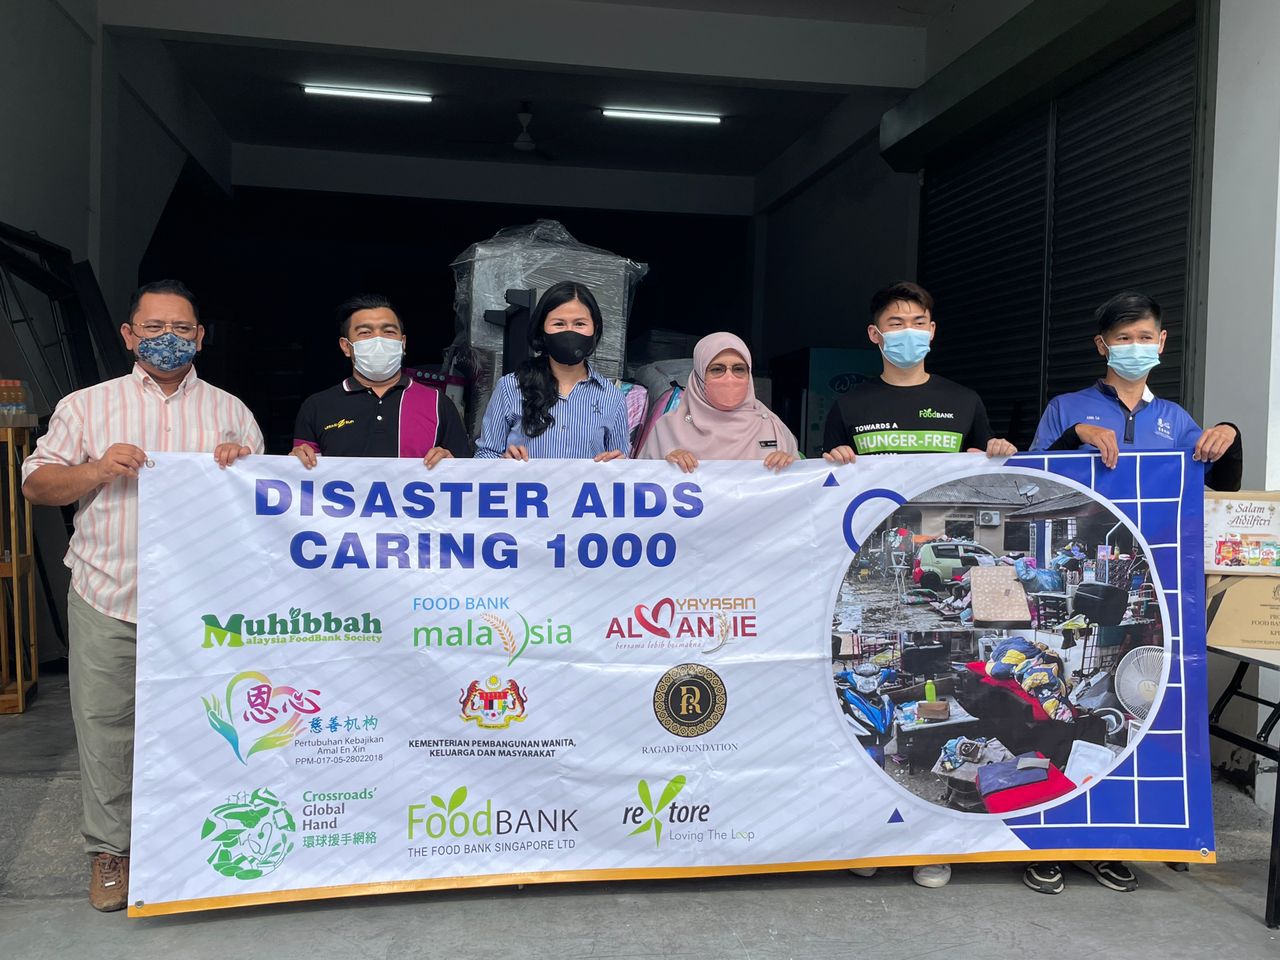 NS主文／文丁恩心慈善机构推动“Disaster Aids Caring 1000”助灾黎